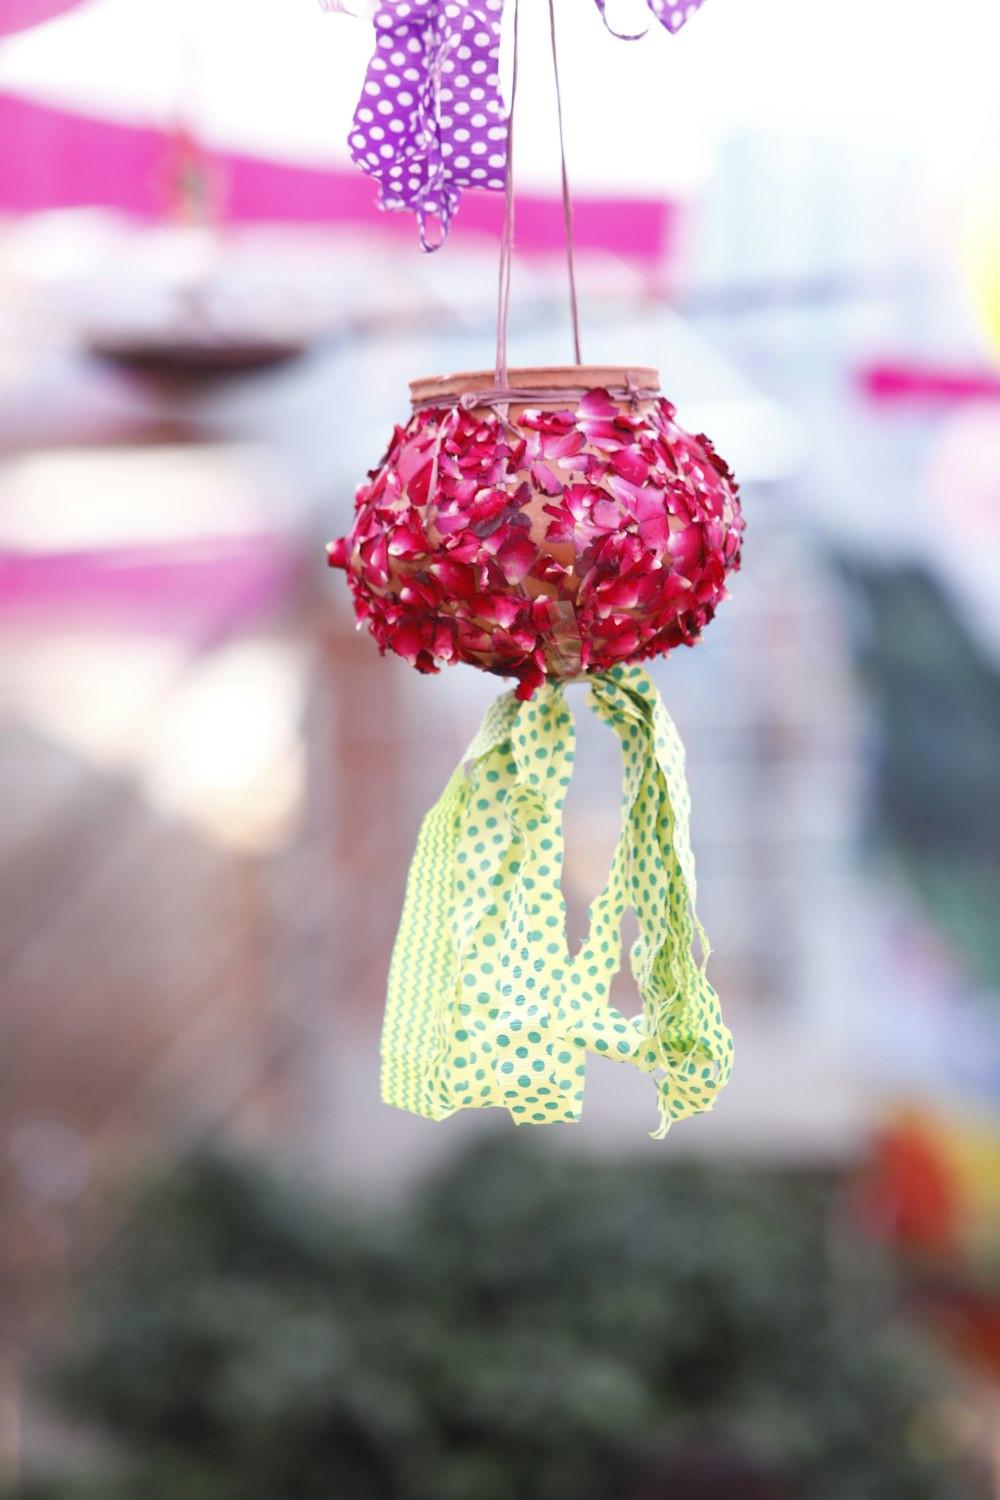 a flower pot hanging from a string in the air